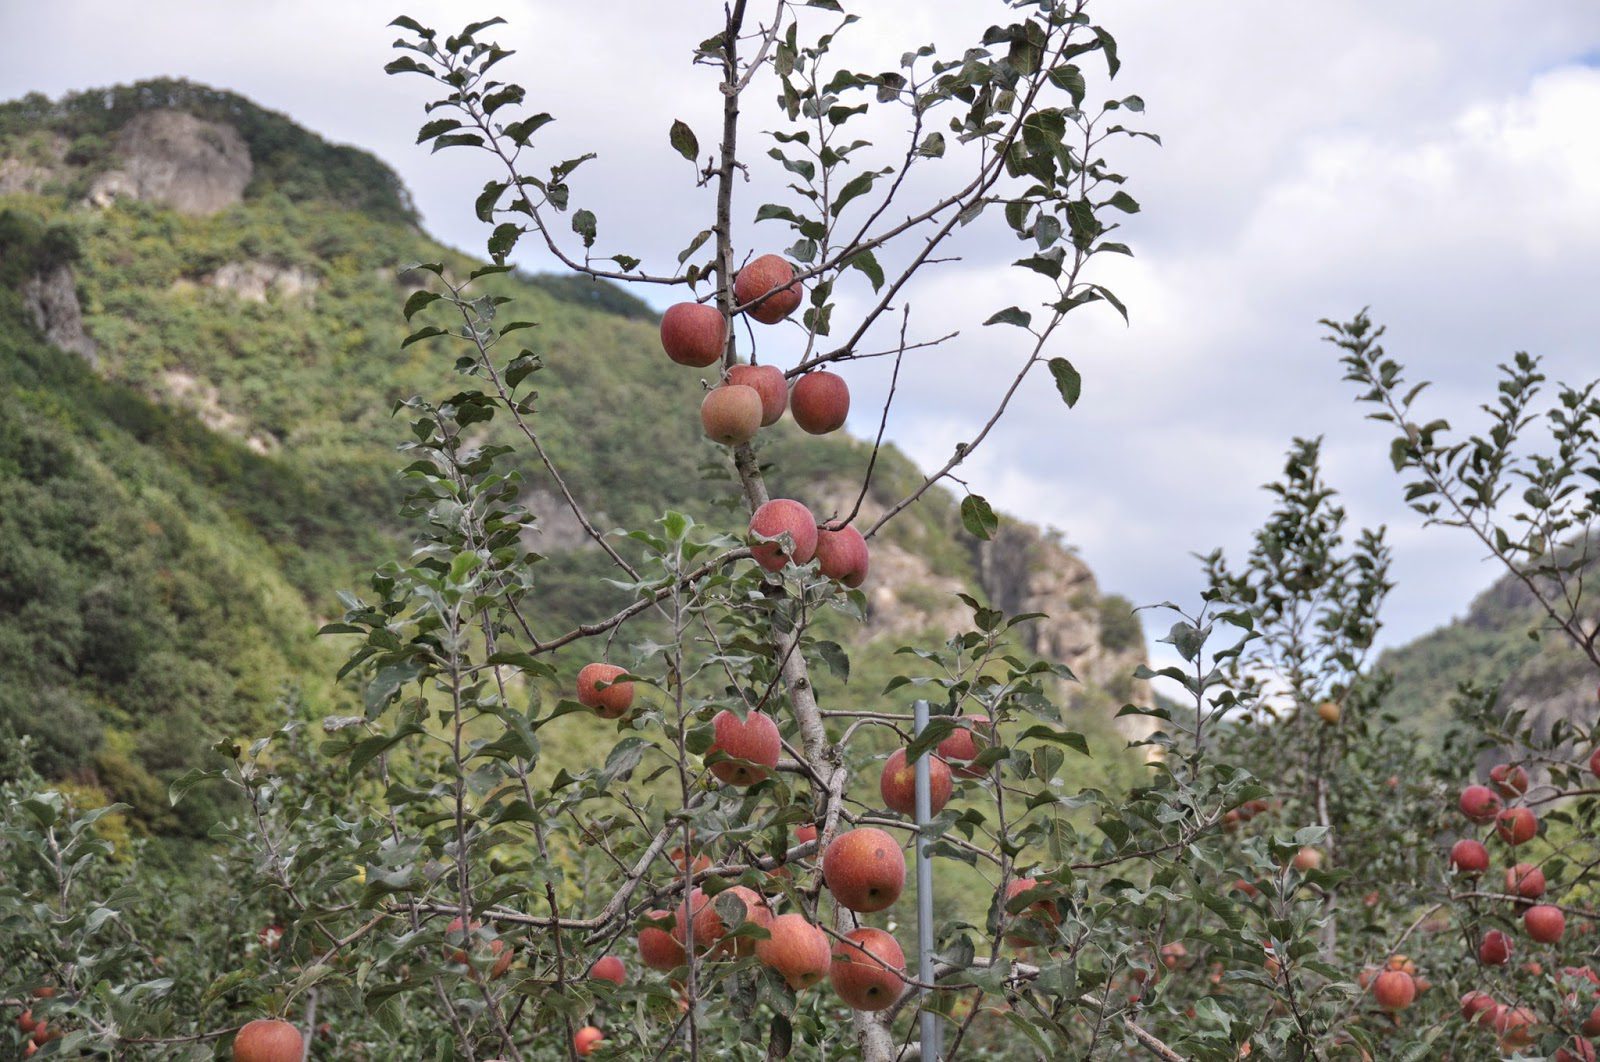 This region is famous for its apples